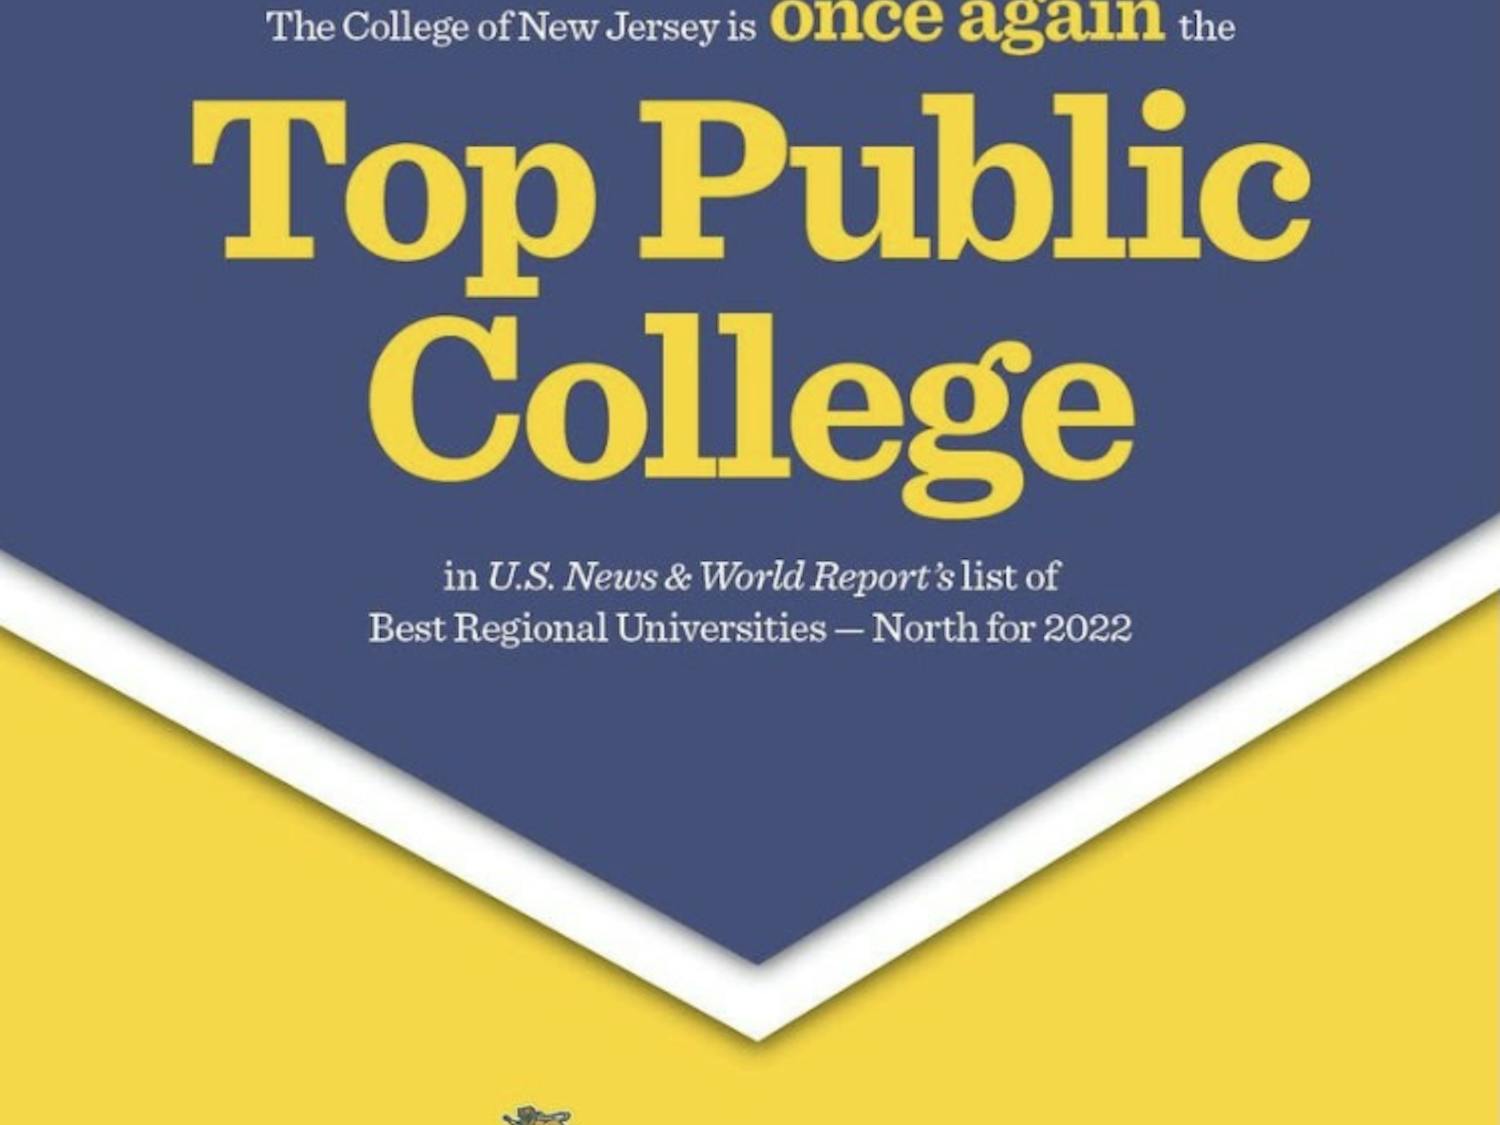 The College was ranked as the best public school among regional universities in the North region in a recent ranking (Instagram @tcnj_official). 